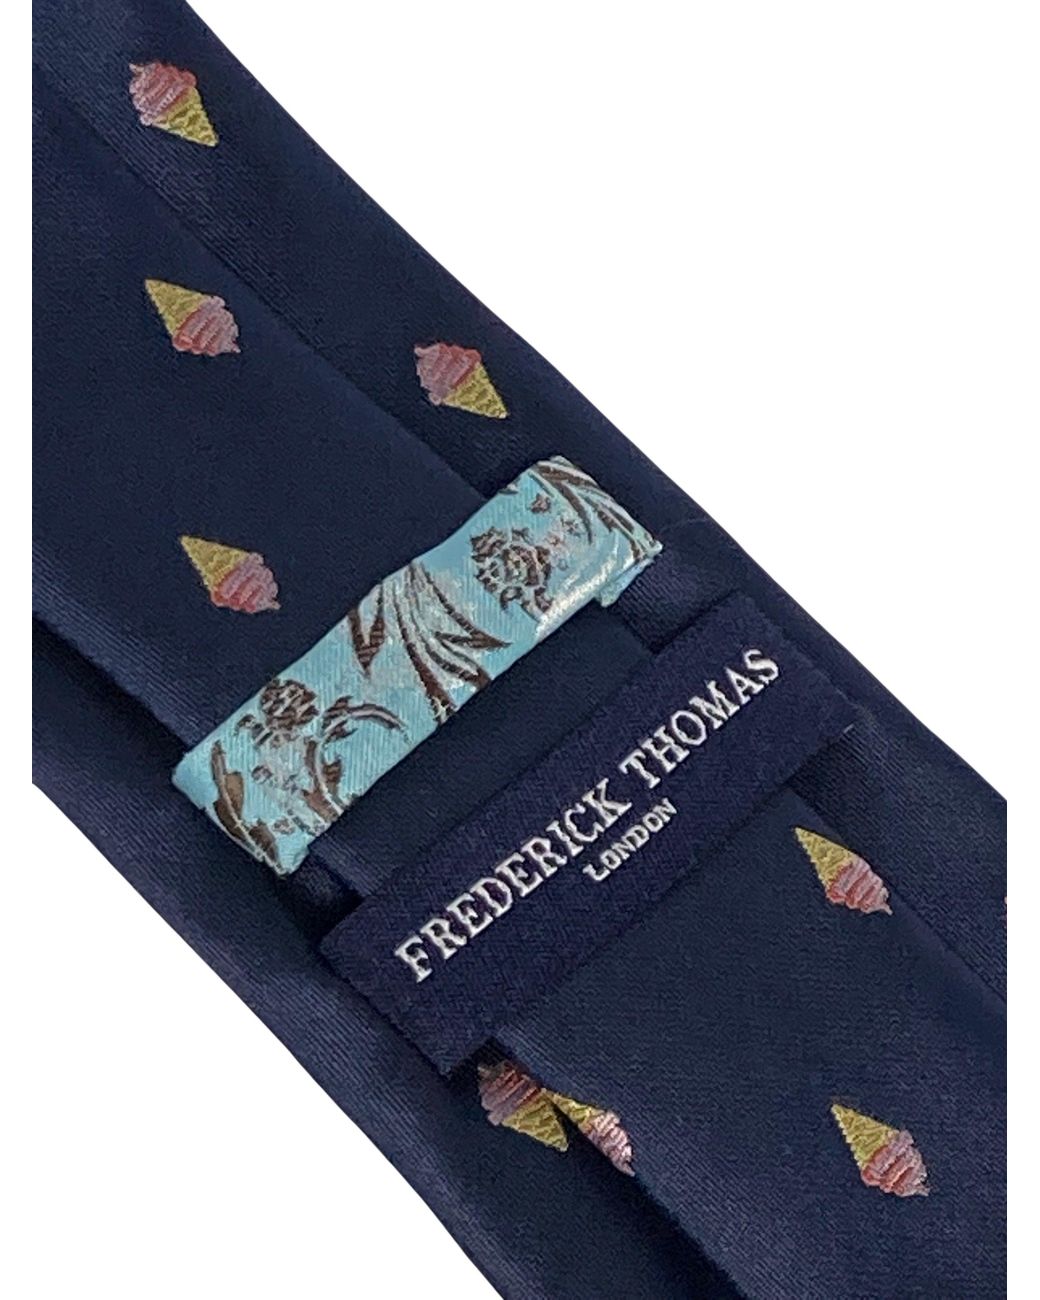 Mens Accessories Ties Frederick Thomas Ties Dark Navy Blue With Blush Pink Floral Design Cotton Tie for Men 